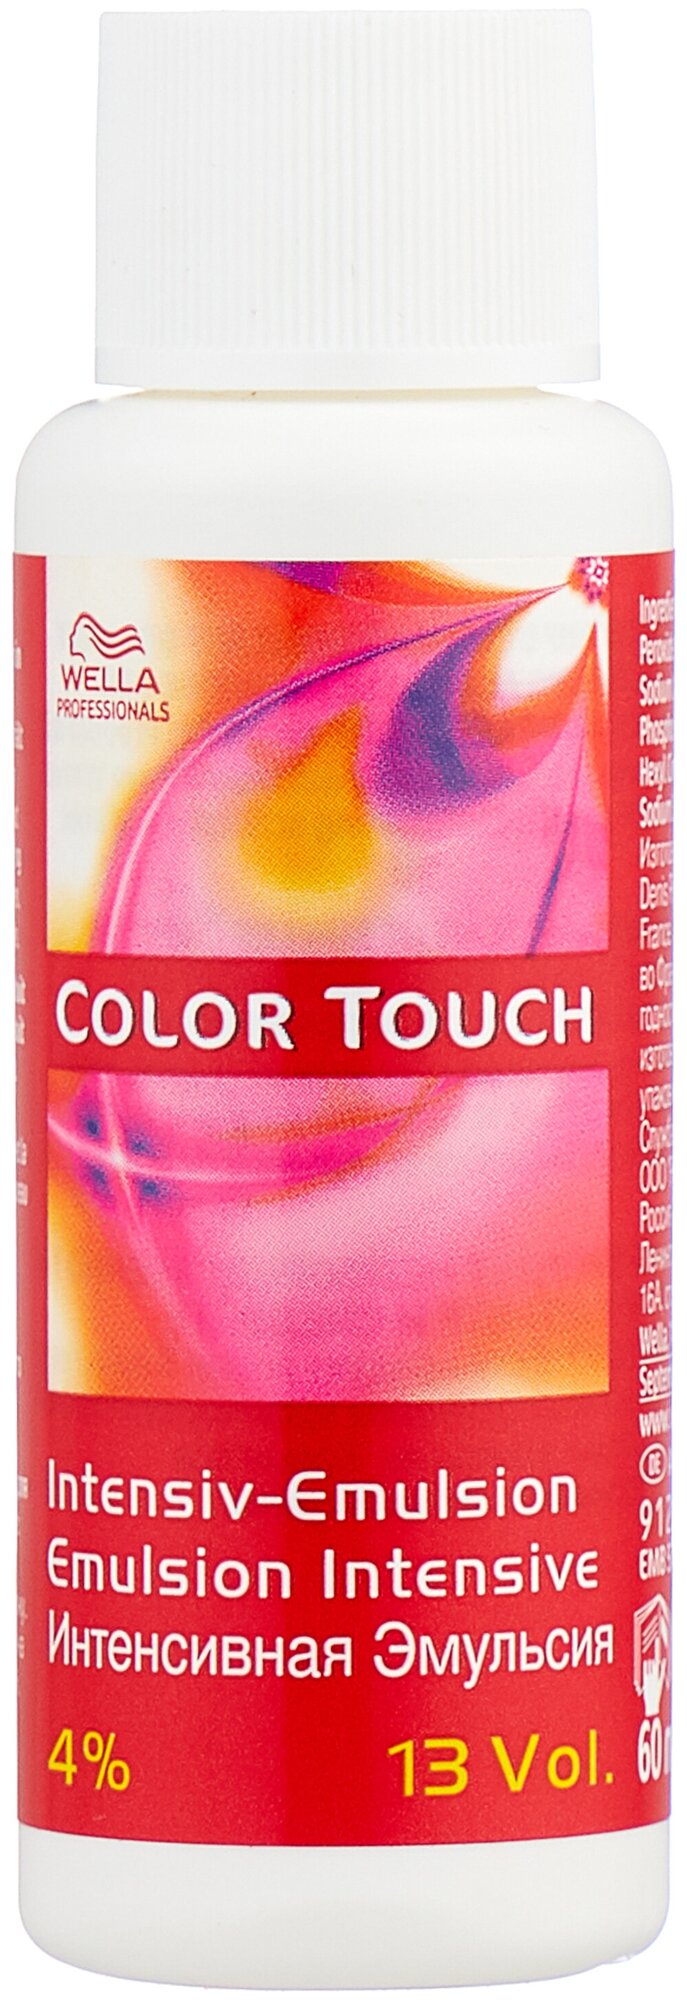 Wella Professionals Color touch Эмульсия 4% / 60 мл